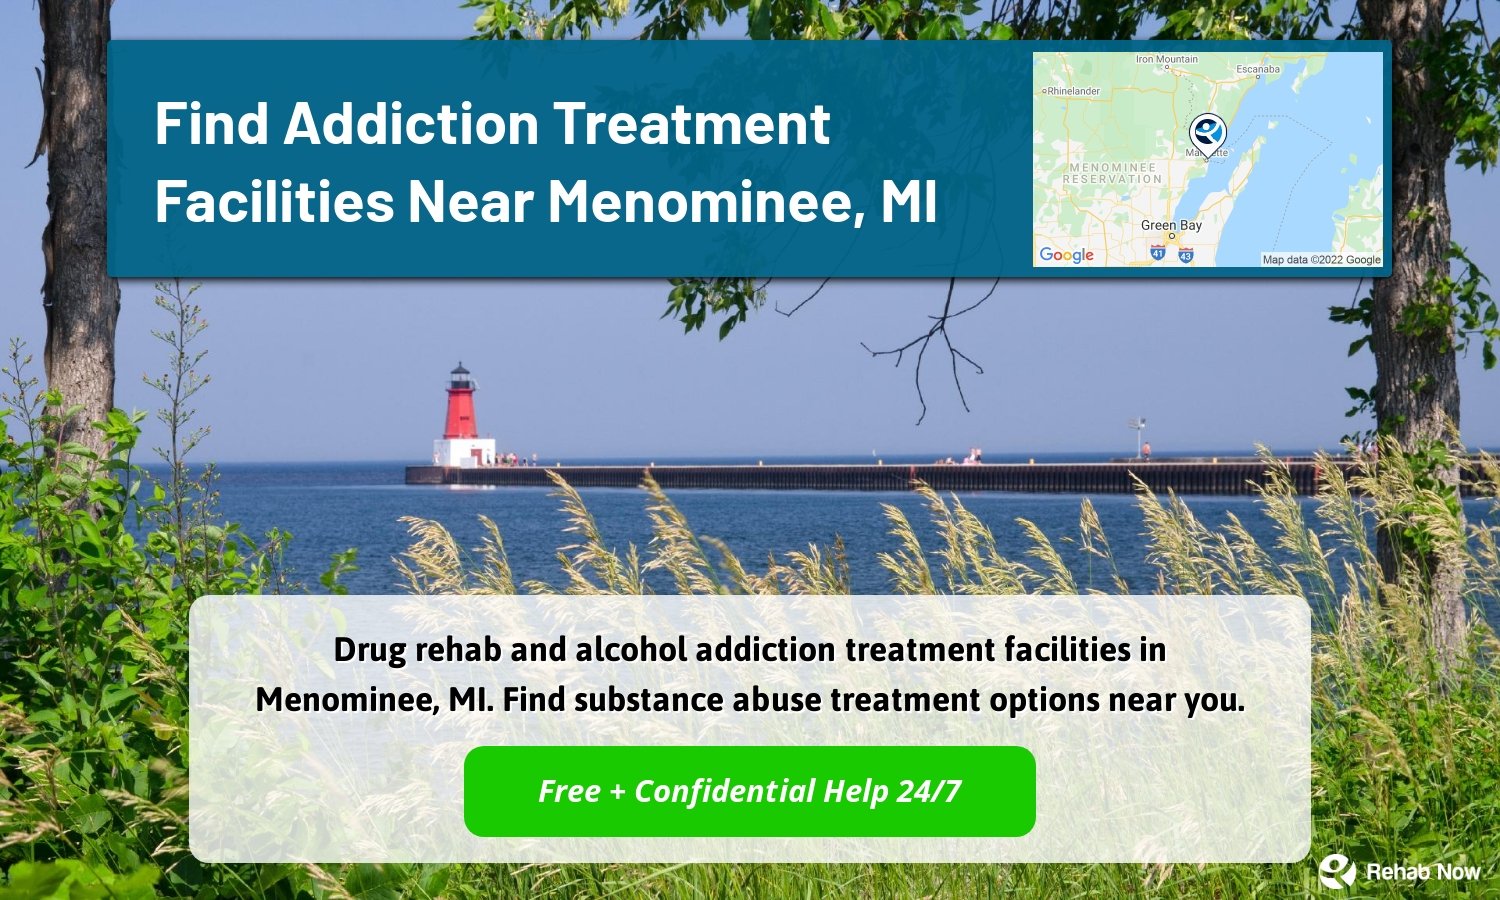 Drug rehab and alcohol addiction treatment facilities in Menominee, MI. Find substance abuse treatment options near you.